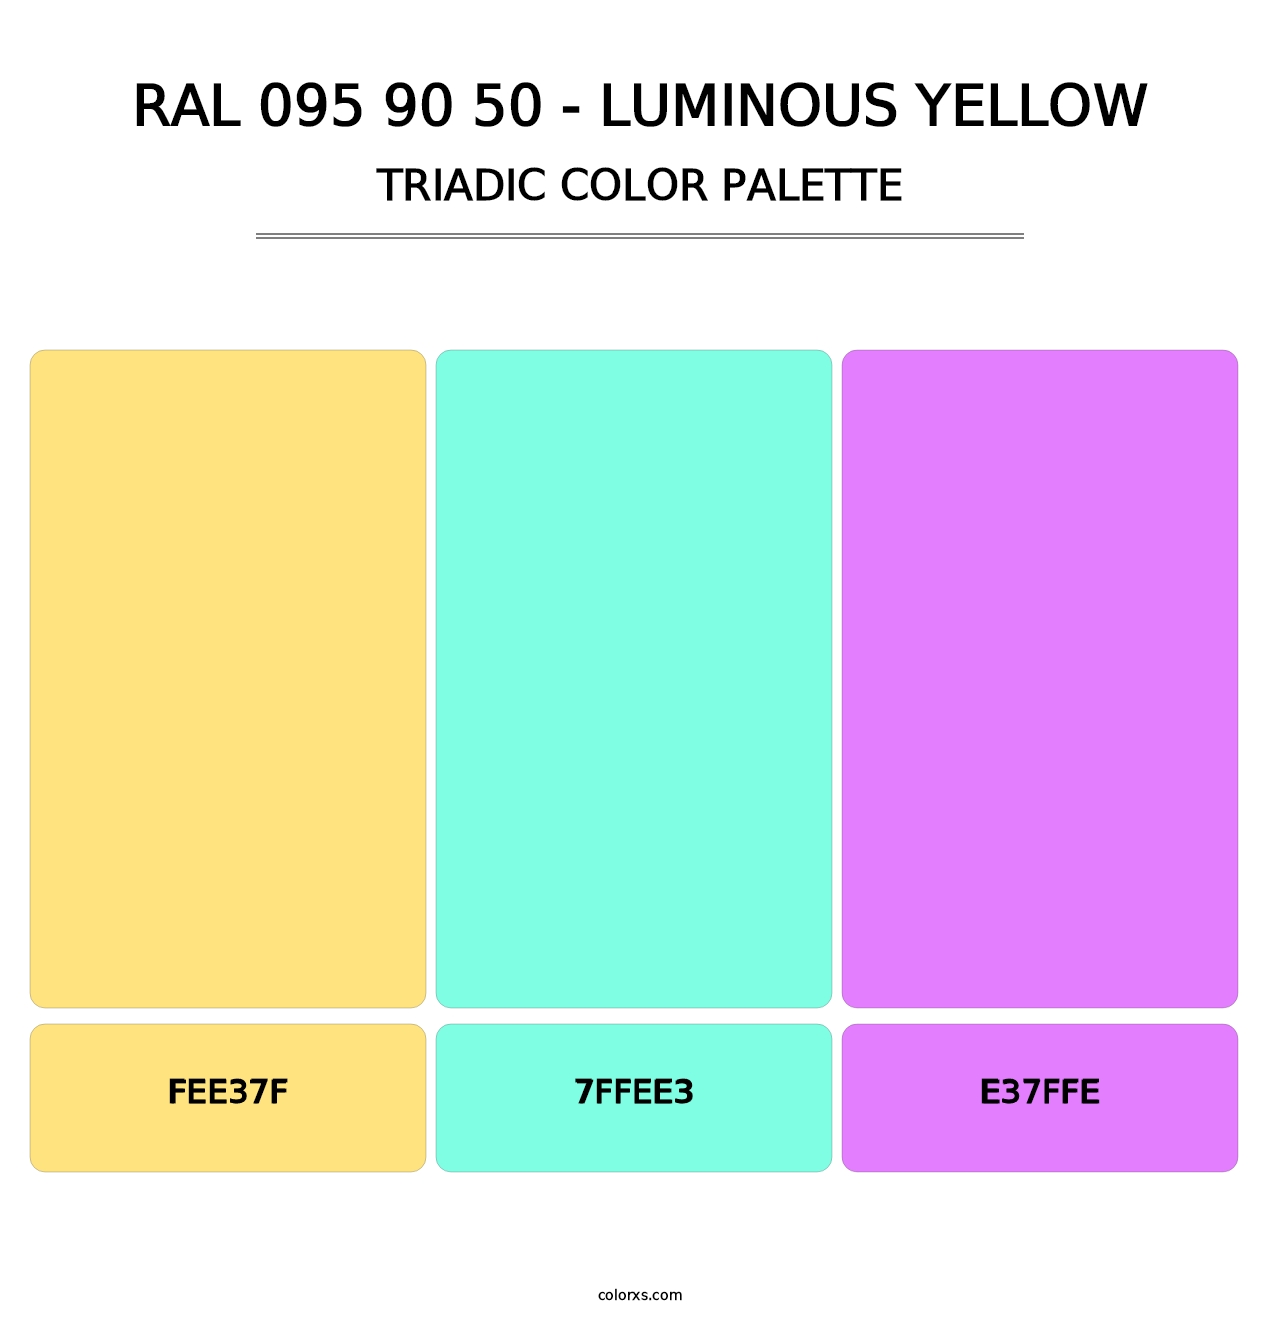 RAL 095 90 50 - Luminous Yellow - Triadic Color Palette